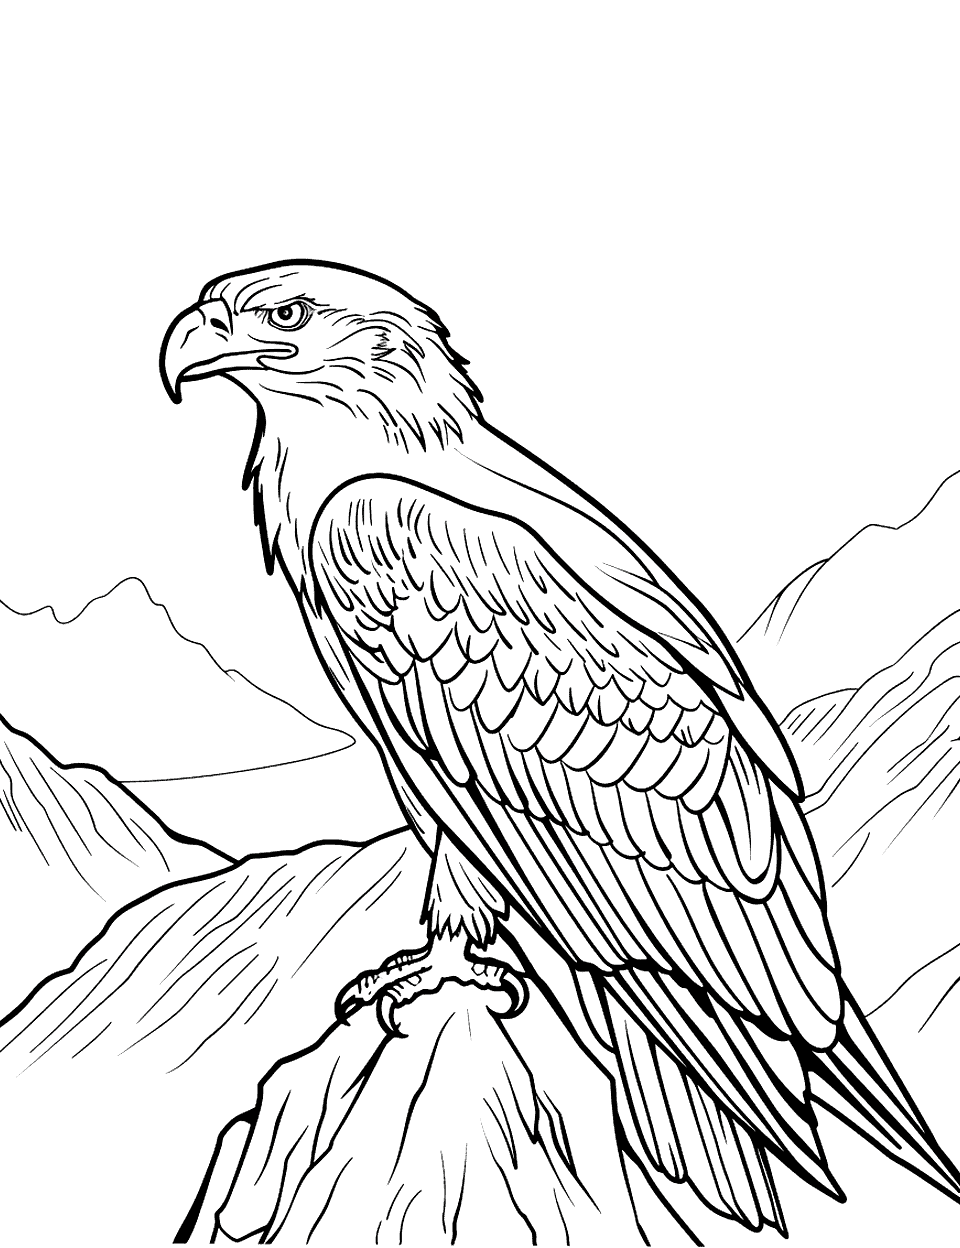 Eagle and the Mountain Peak Coloring Page - An eagle perches majestically on the peak of a mountain, overlooking a valley with minimal detail in the background.